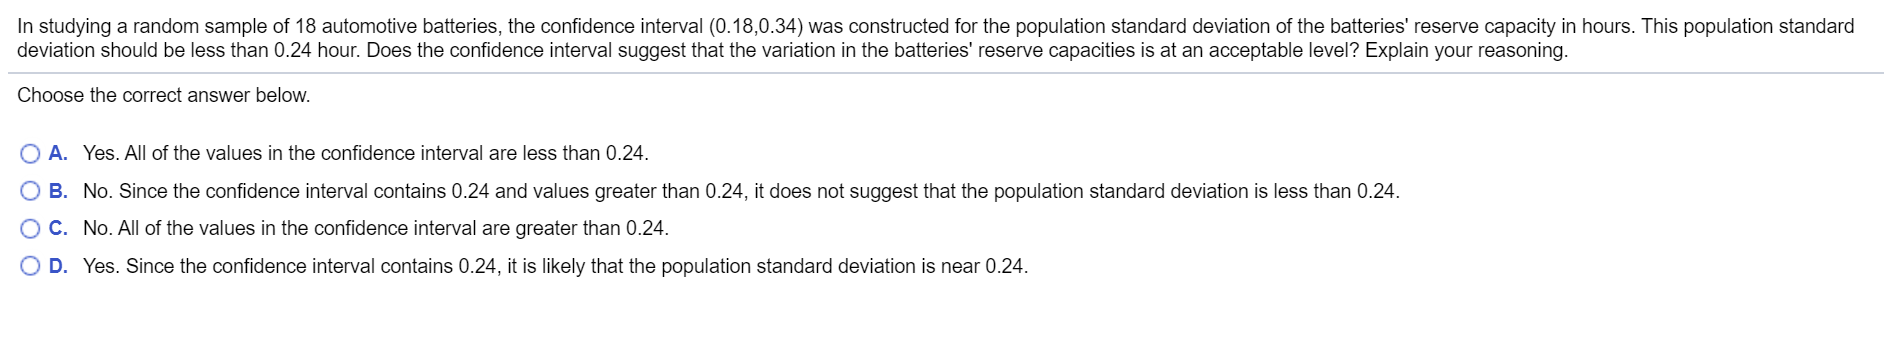 In studying a random sample of 18 automotive batteries, the confidence interval (0.18,0.34) was constructed for the population standard deviation of the batteries' reserve capacity in hours. This population standard
deviation should be less than 0.24 hour. Does the confidence interval suggest that the variation in the batteries' reserve capacities is at an acceptable level? Explain your reasoning.
Choose the correct answer below.
O A. Yes. All of the values in the confidence interval are less than 0.24.
O B. No. Since the confidence interval contains 0.24 and values greater than 0.24, it does not suggest that the population standard deviation is less than 0.24.
O C. No. All of the values in the confidence interval are greater than 0.24.
O D. Yes. Since the confidence interval contains 0.24, it is likely that the population standard deviation is near 0.24.
